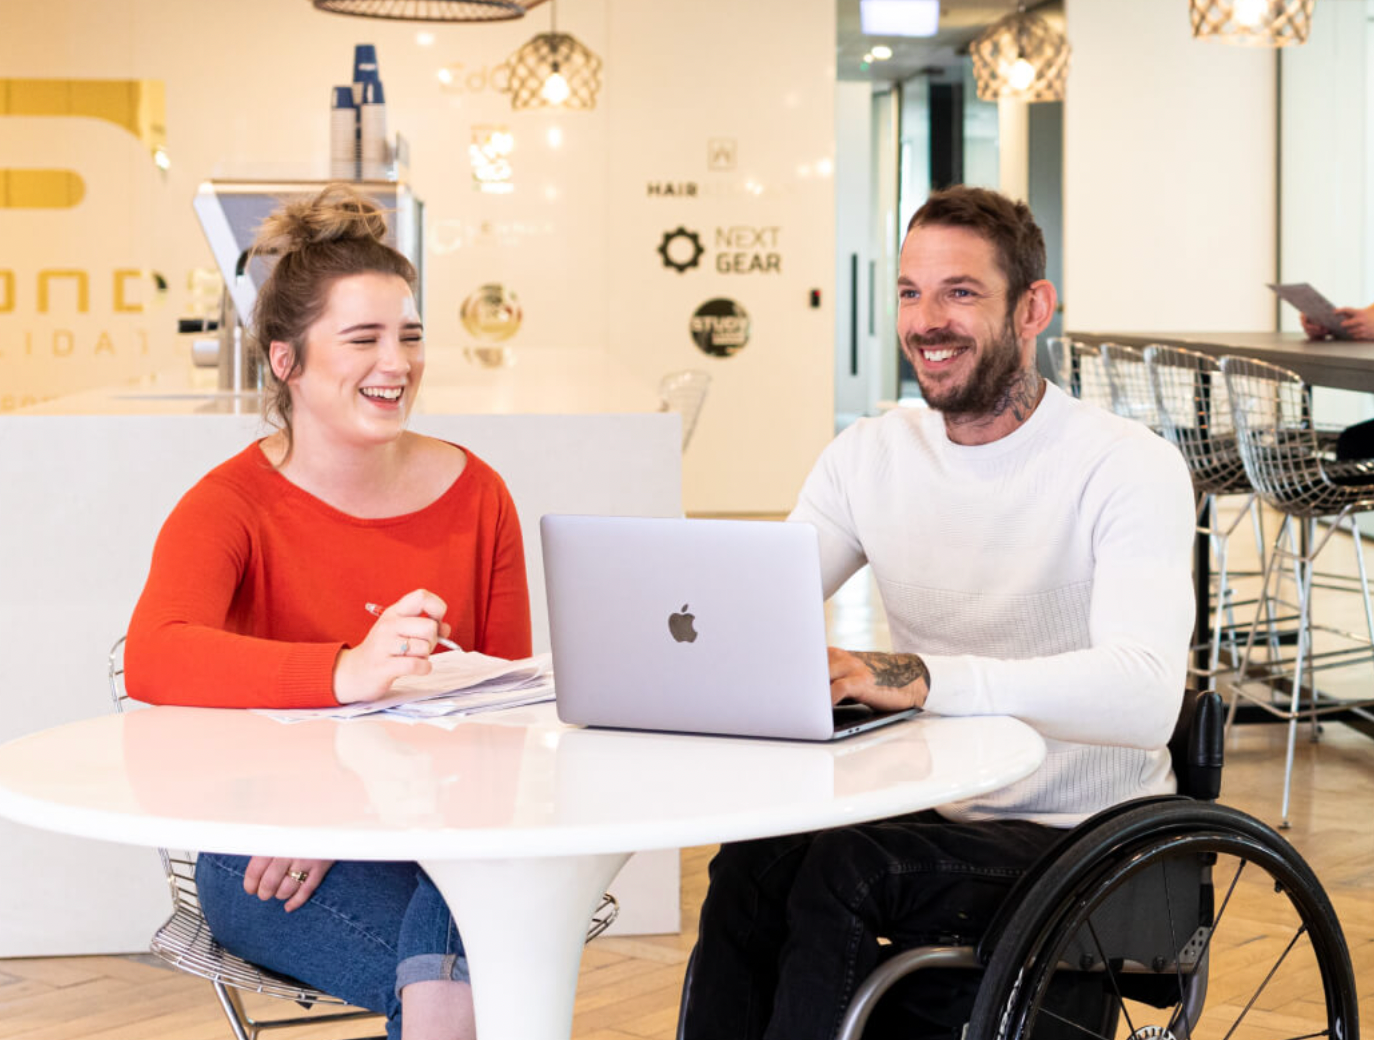 Female (left) sitting at a white office work desk alongside a male wheelchair user (right) who works on his laptop.